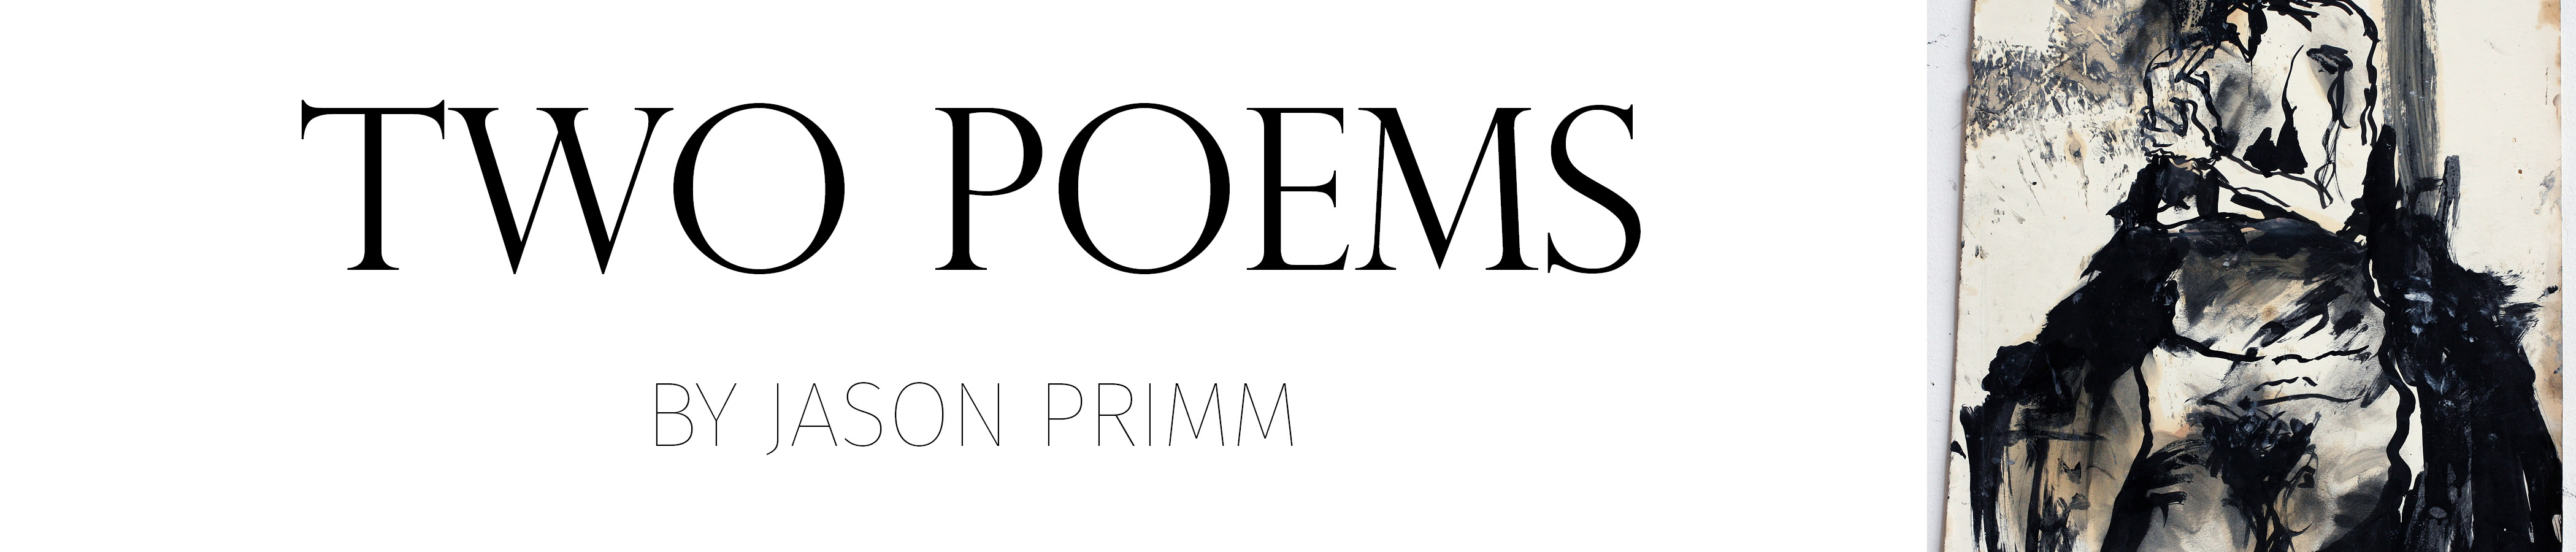 poetry-primm